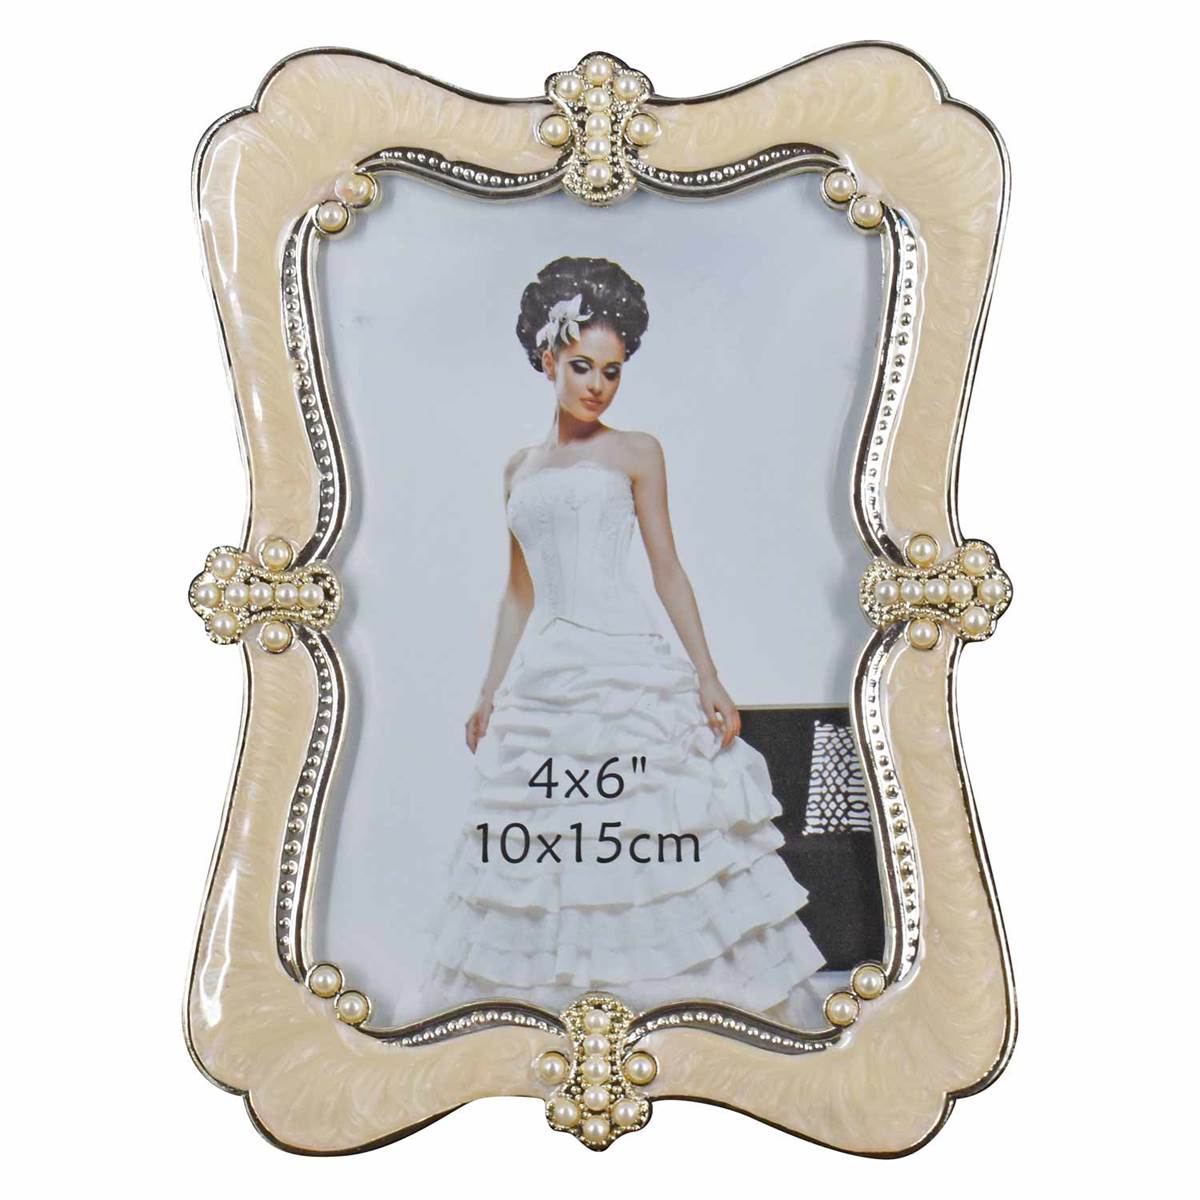 Acrylic Gold textured Photo Frame (4x6) inches (8130)